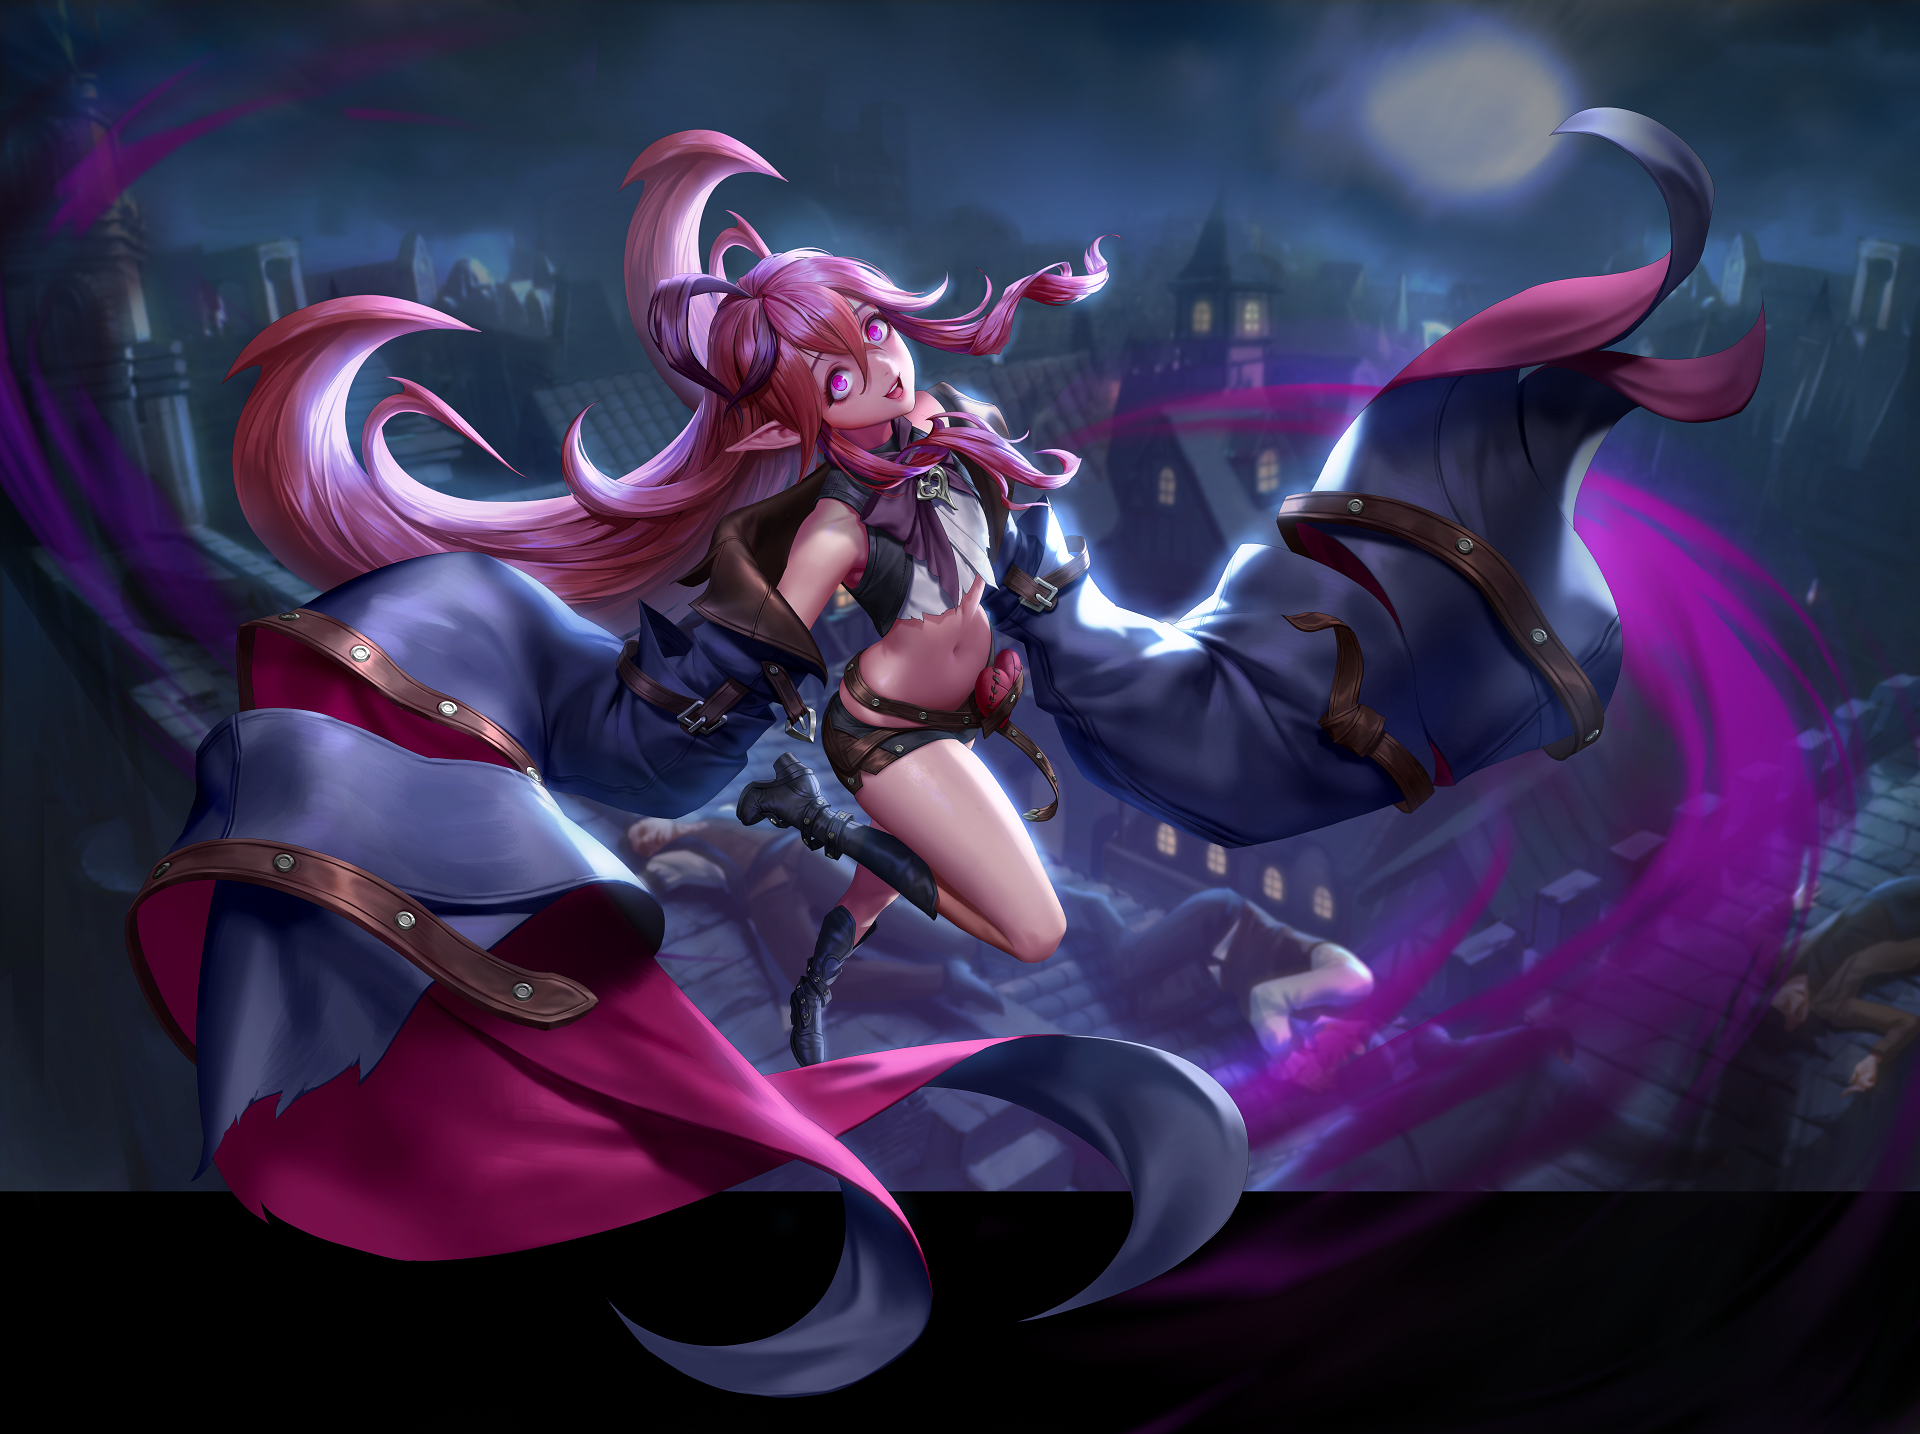 Anime 1920x1434 Arena of Valor video games video game art video game girls video game characters pointy ears